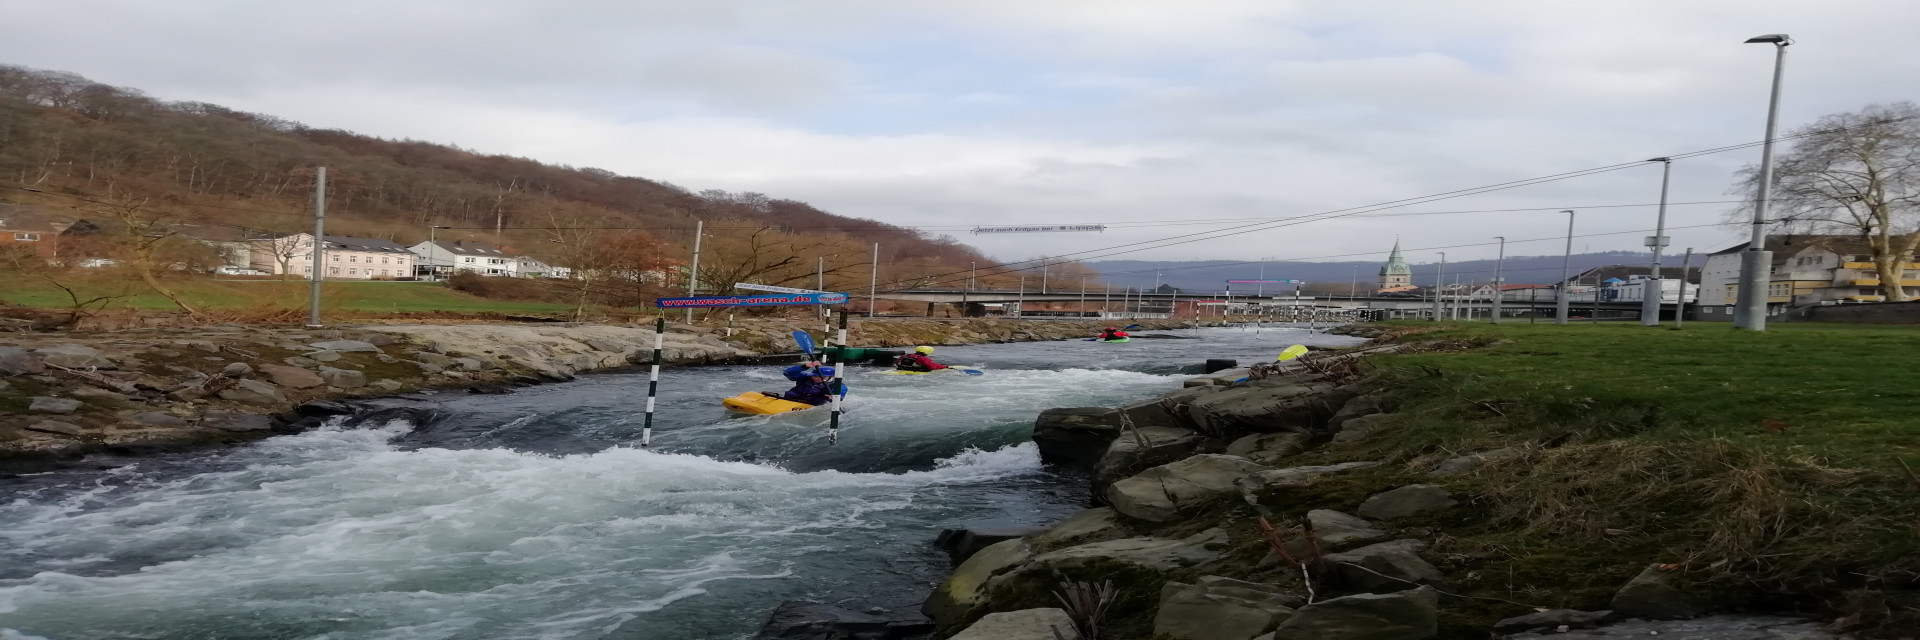 Whitewater (introduction activity)